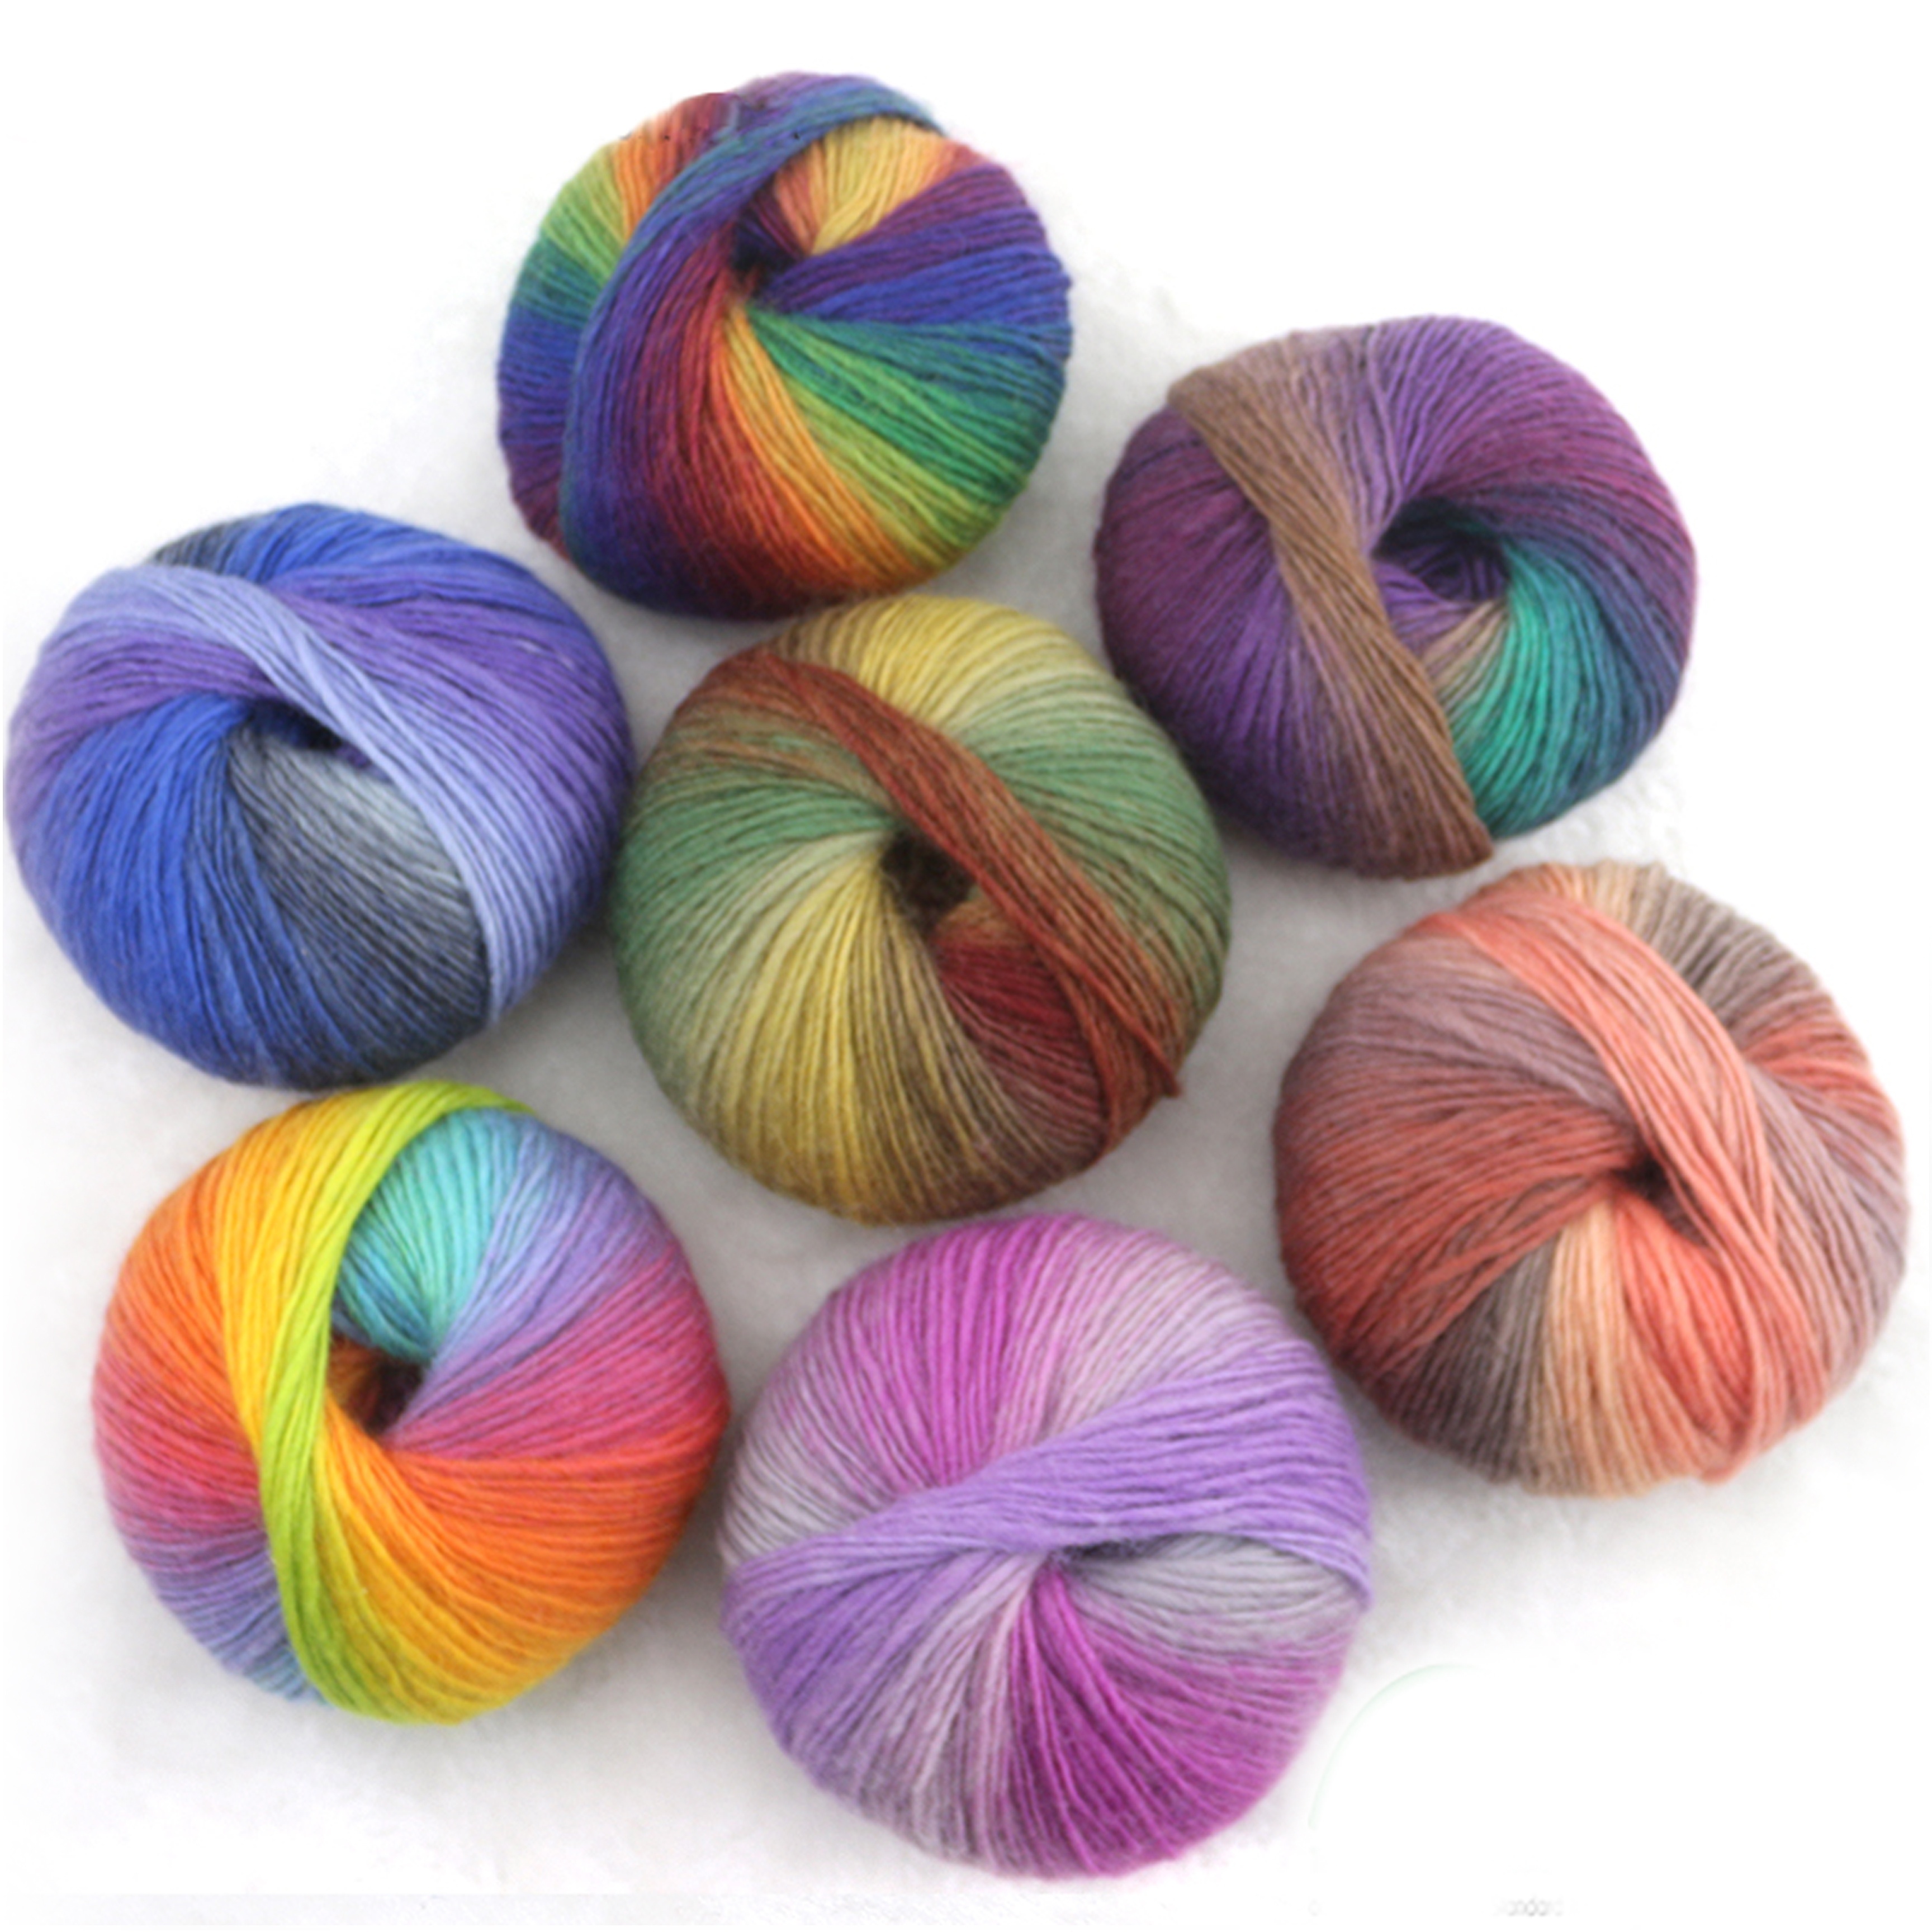 Rainbow Yarns and other colourful wools and yarns